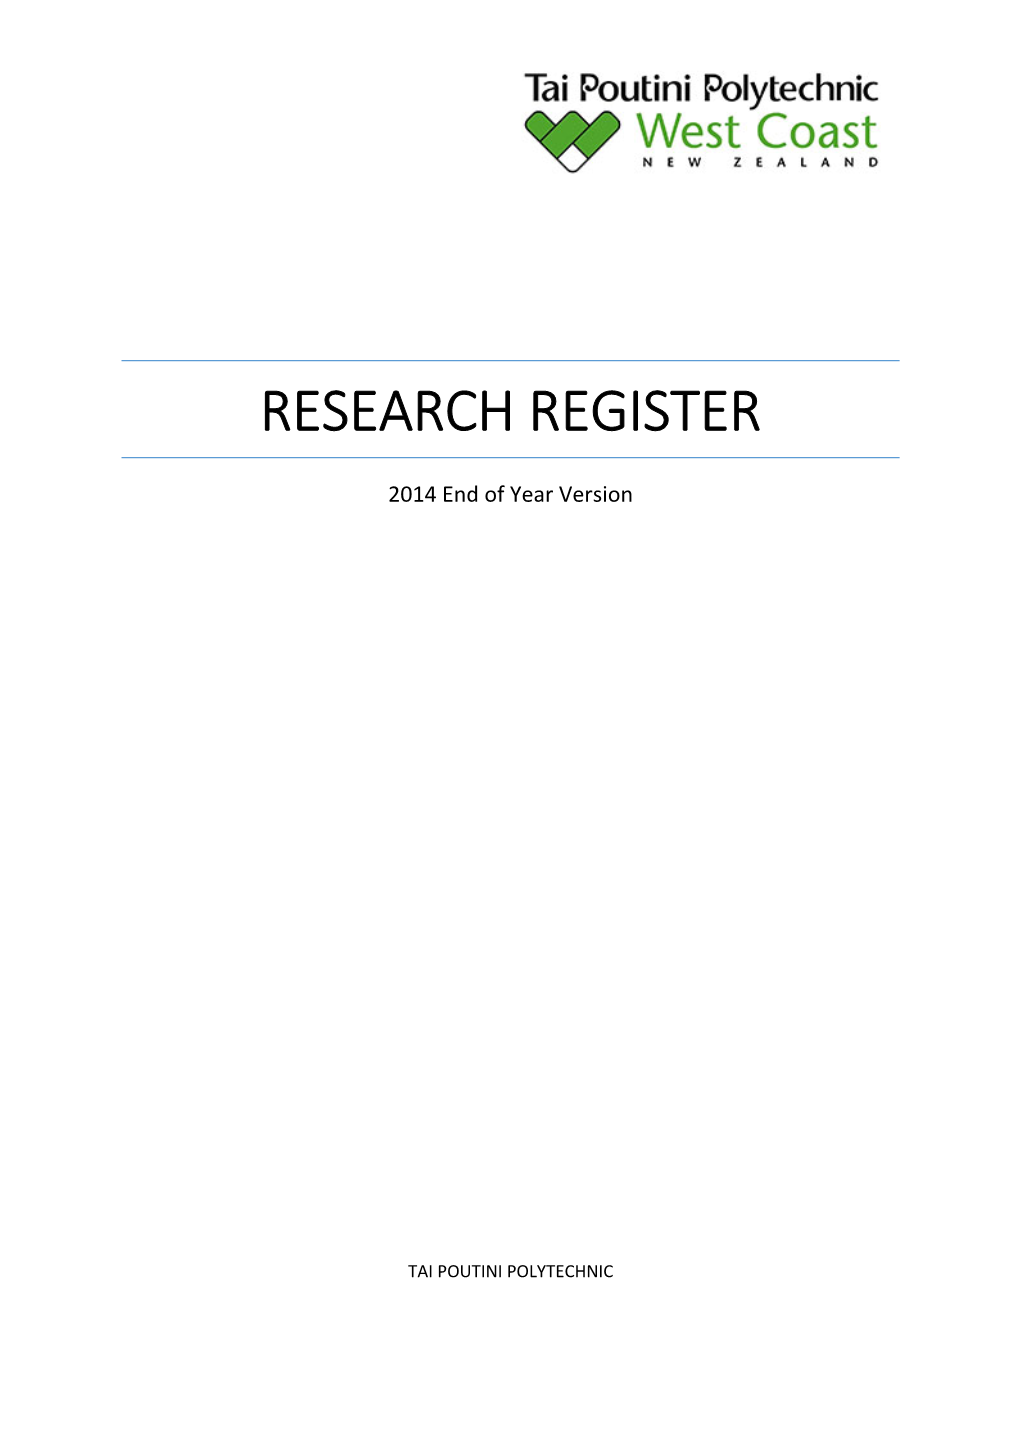 Research Register